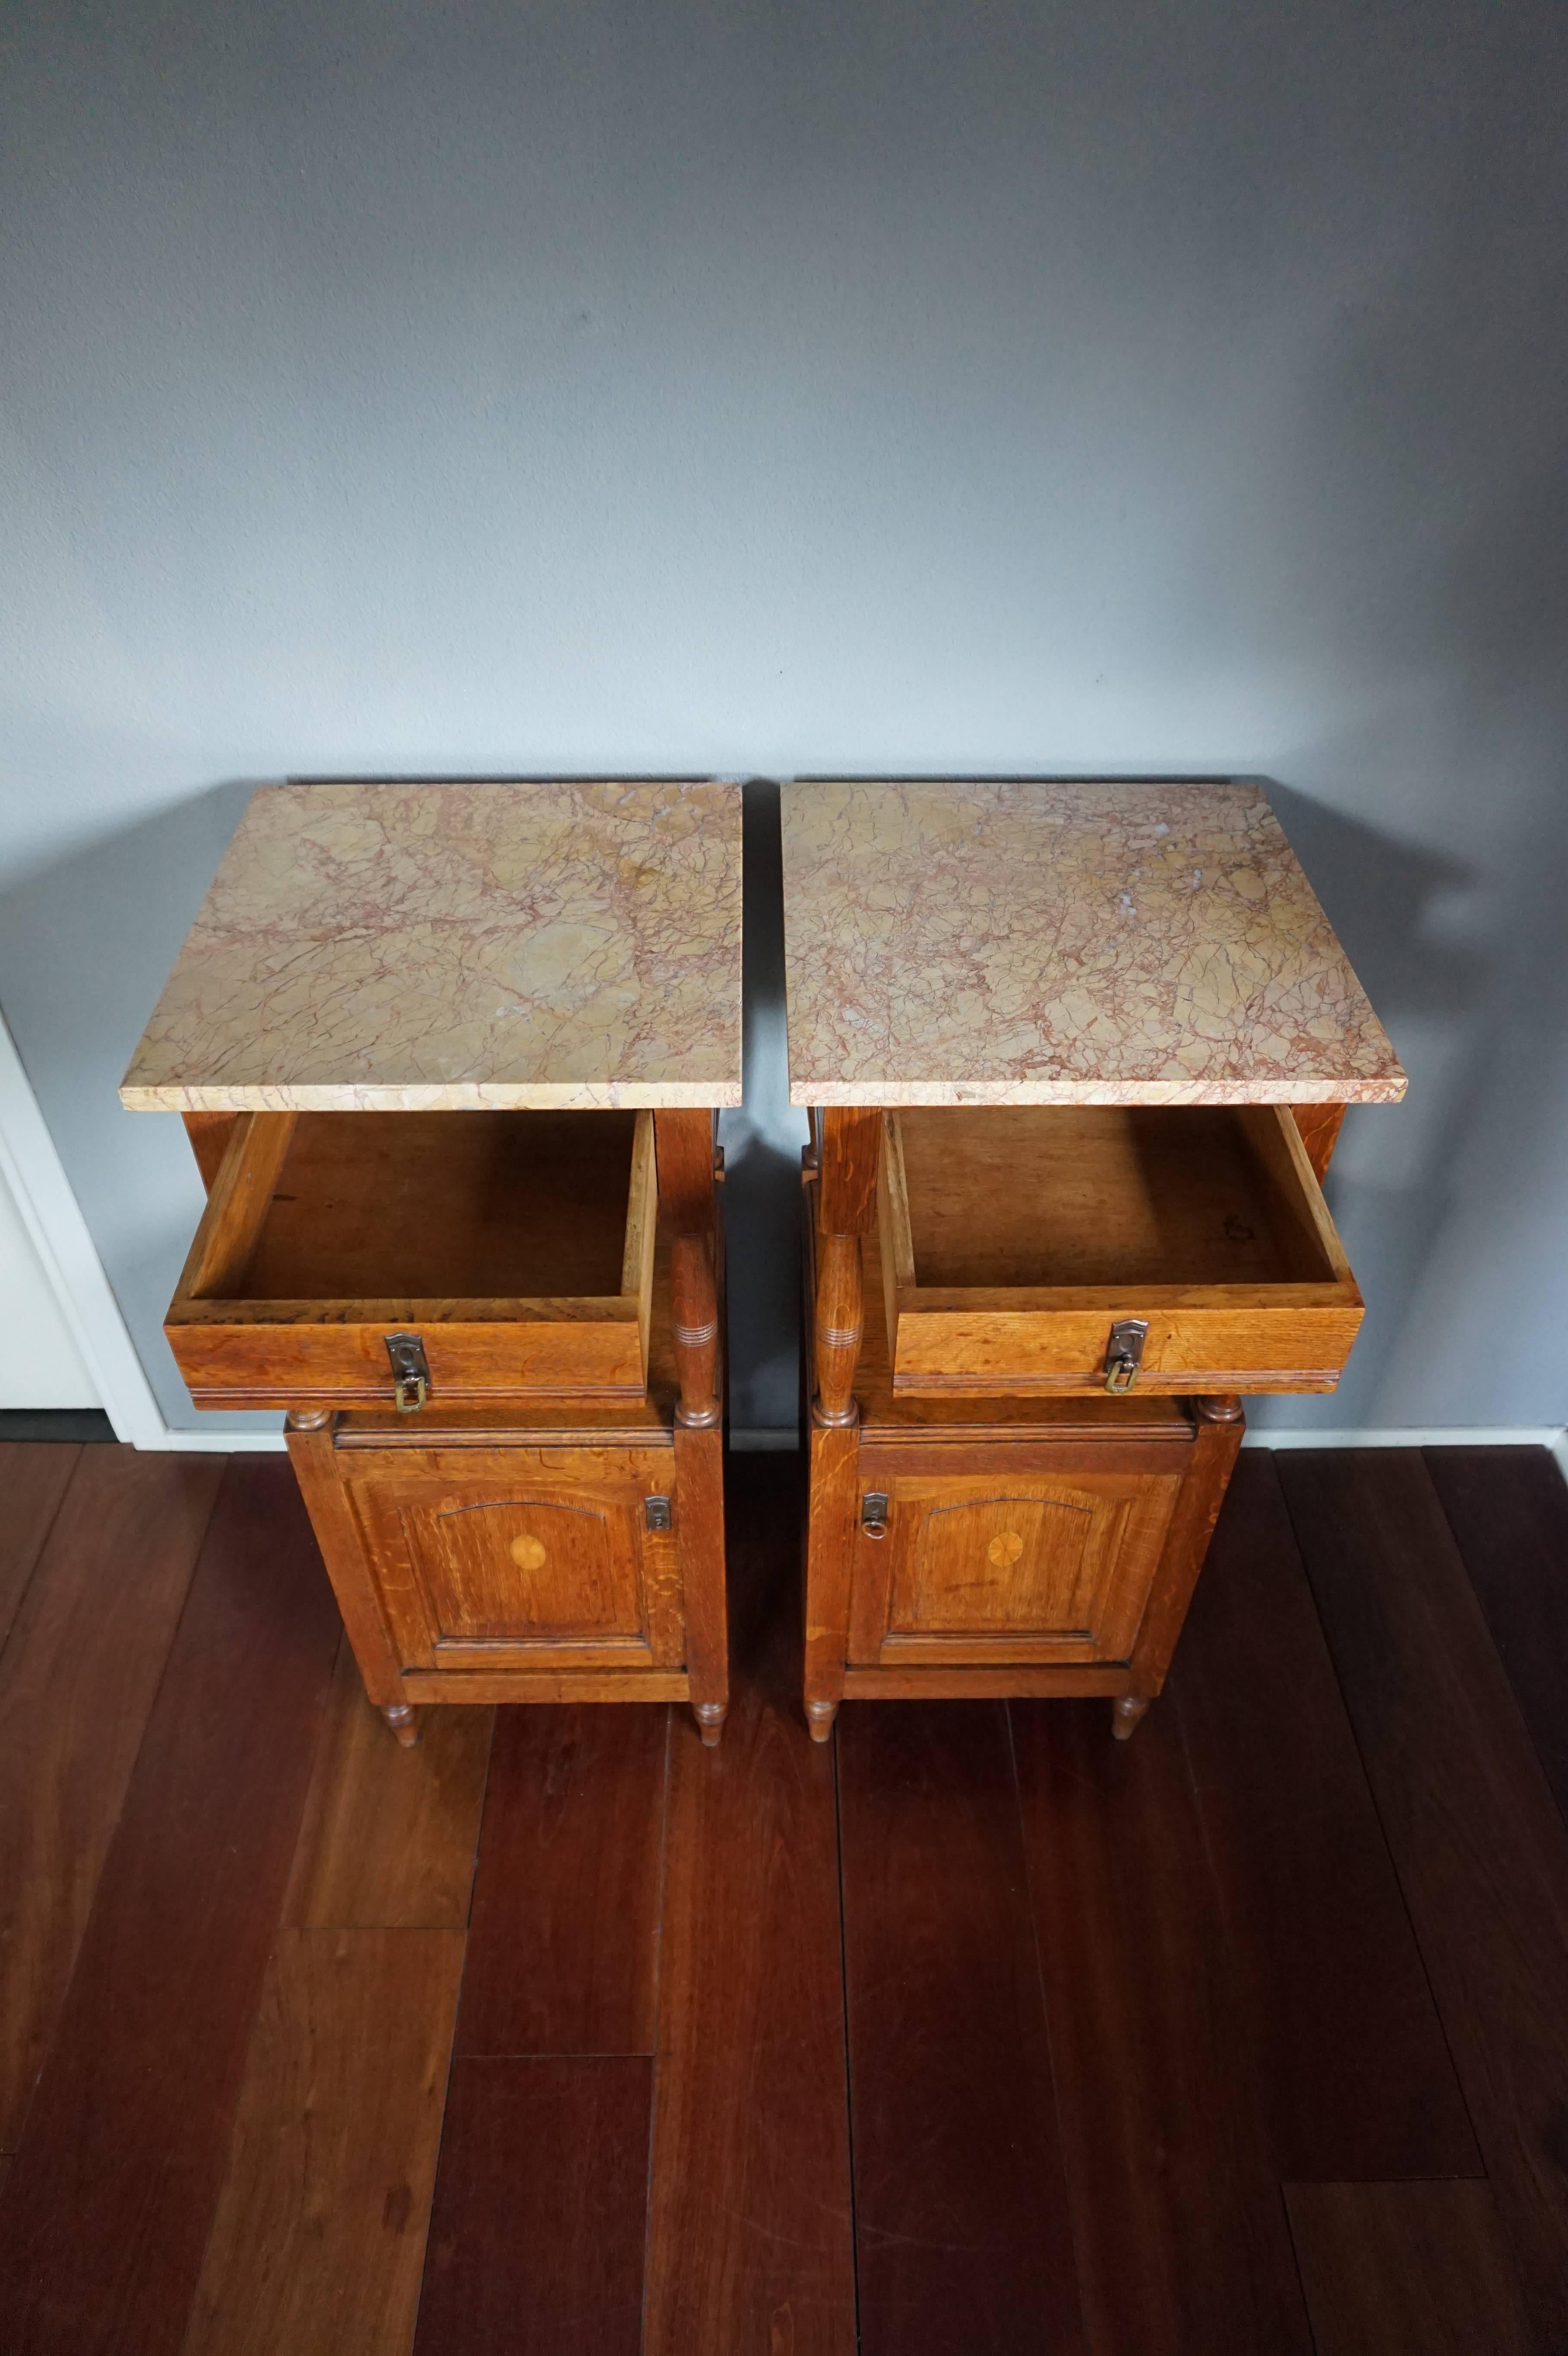 Arts and Crafts Antique, Tall and Inlaid Solid Oak Bedside Cabinets with Marble Tops, A Bargain